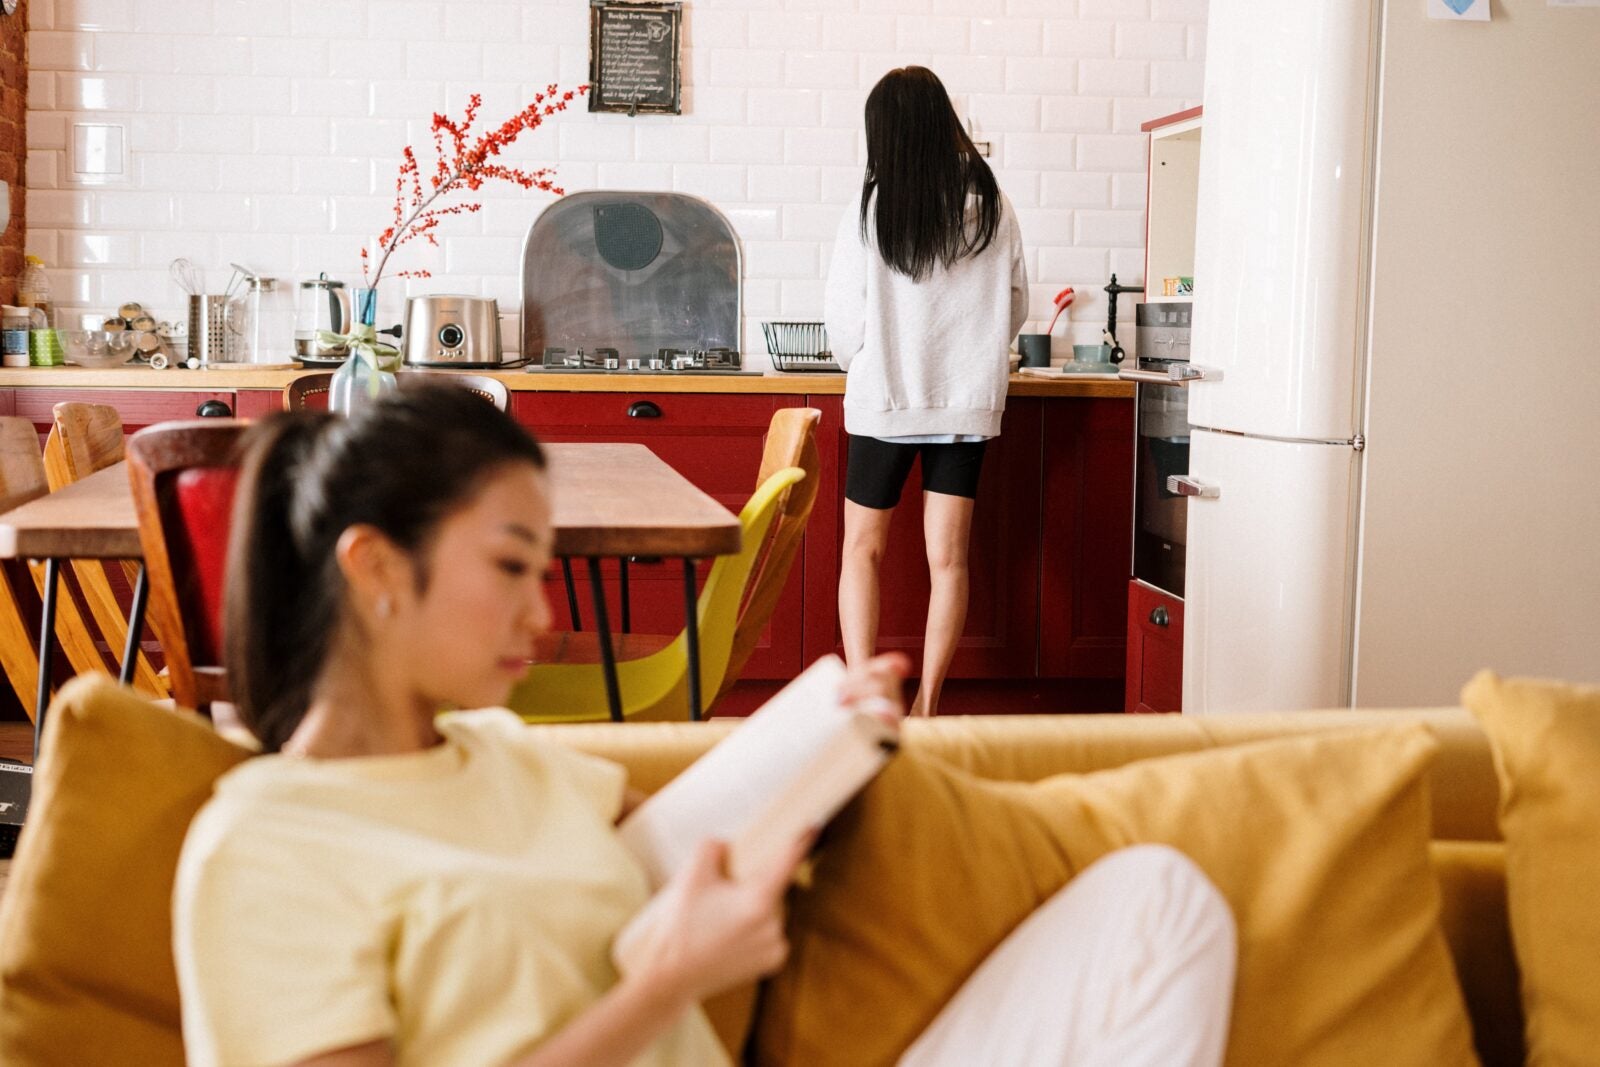 An Asian woman sitting down and reading a book while another woman is in the kitchen.